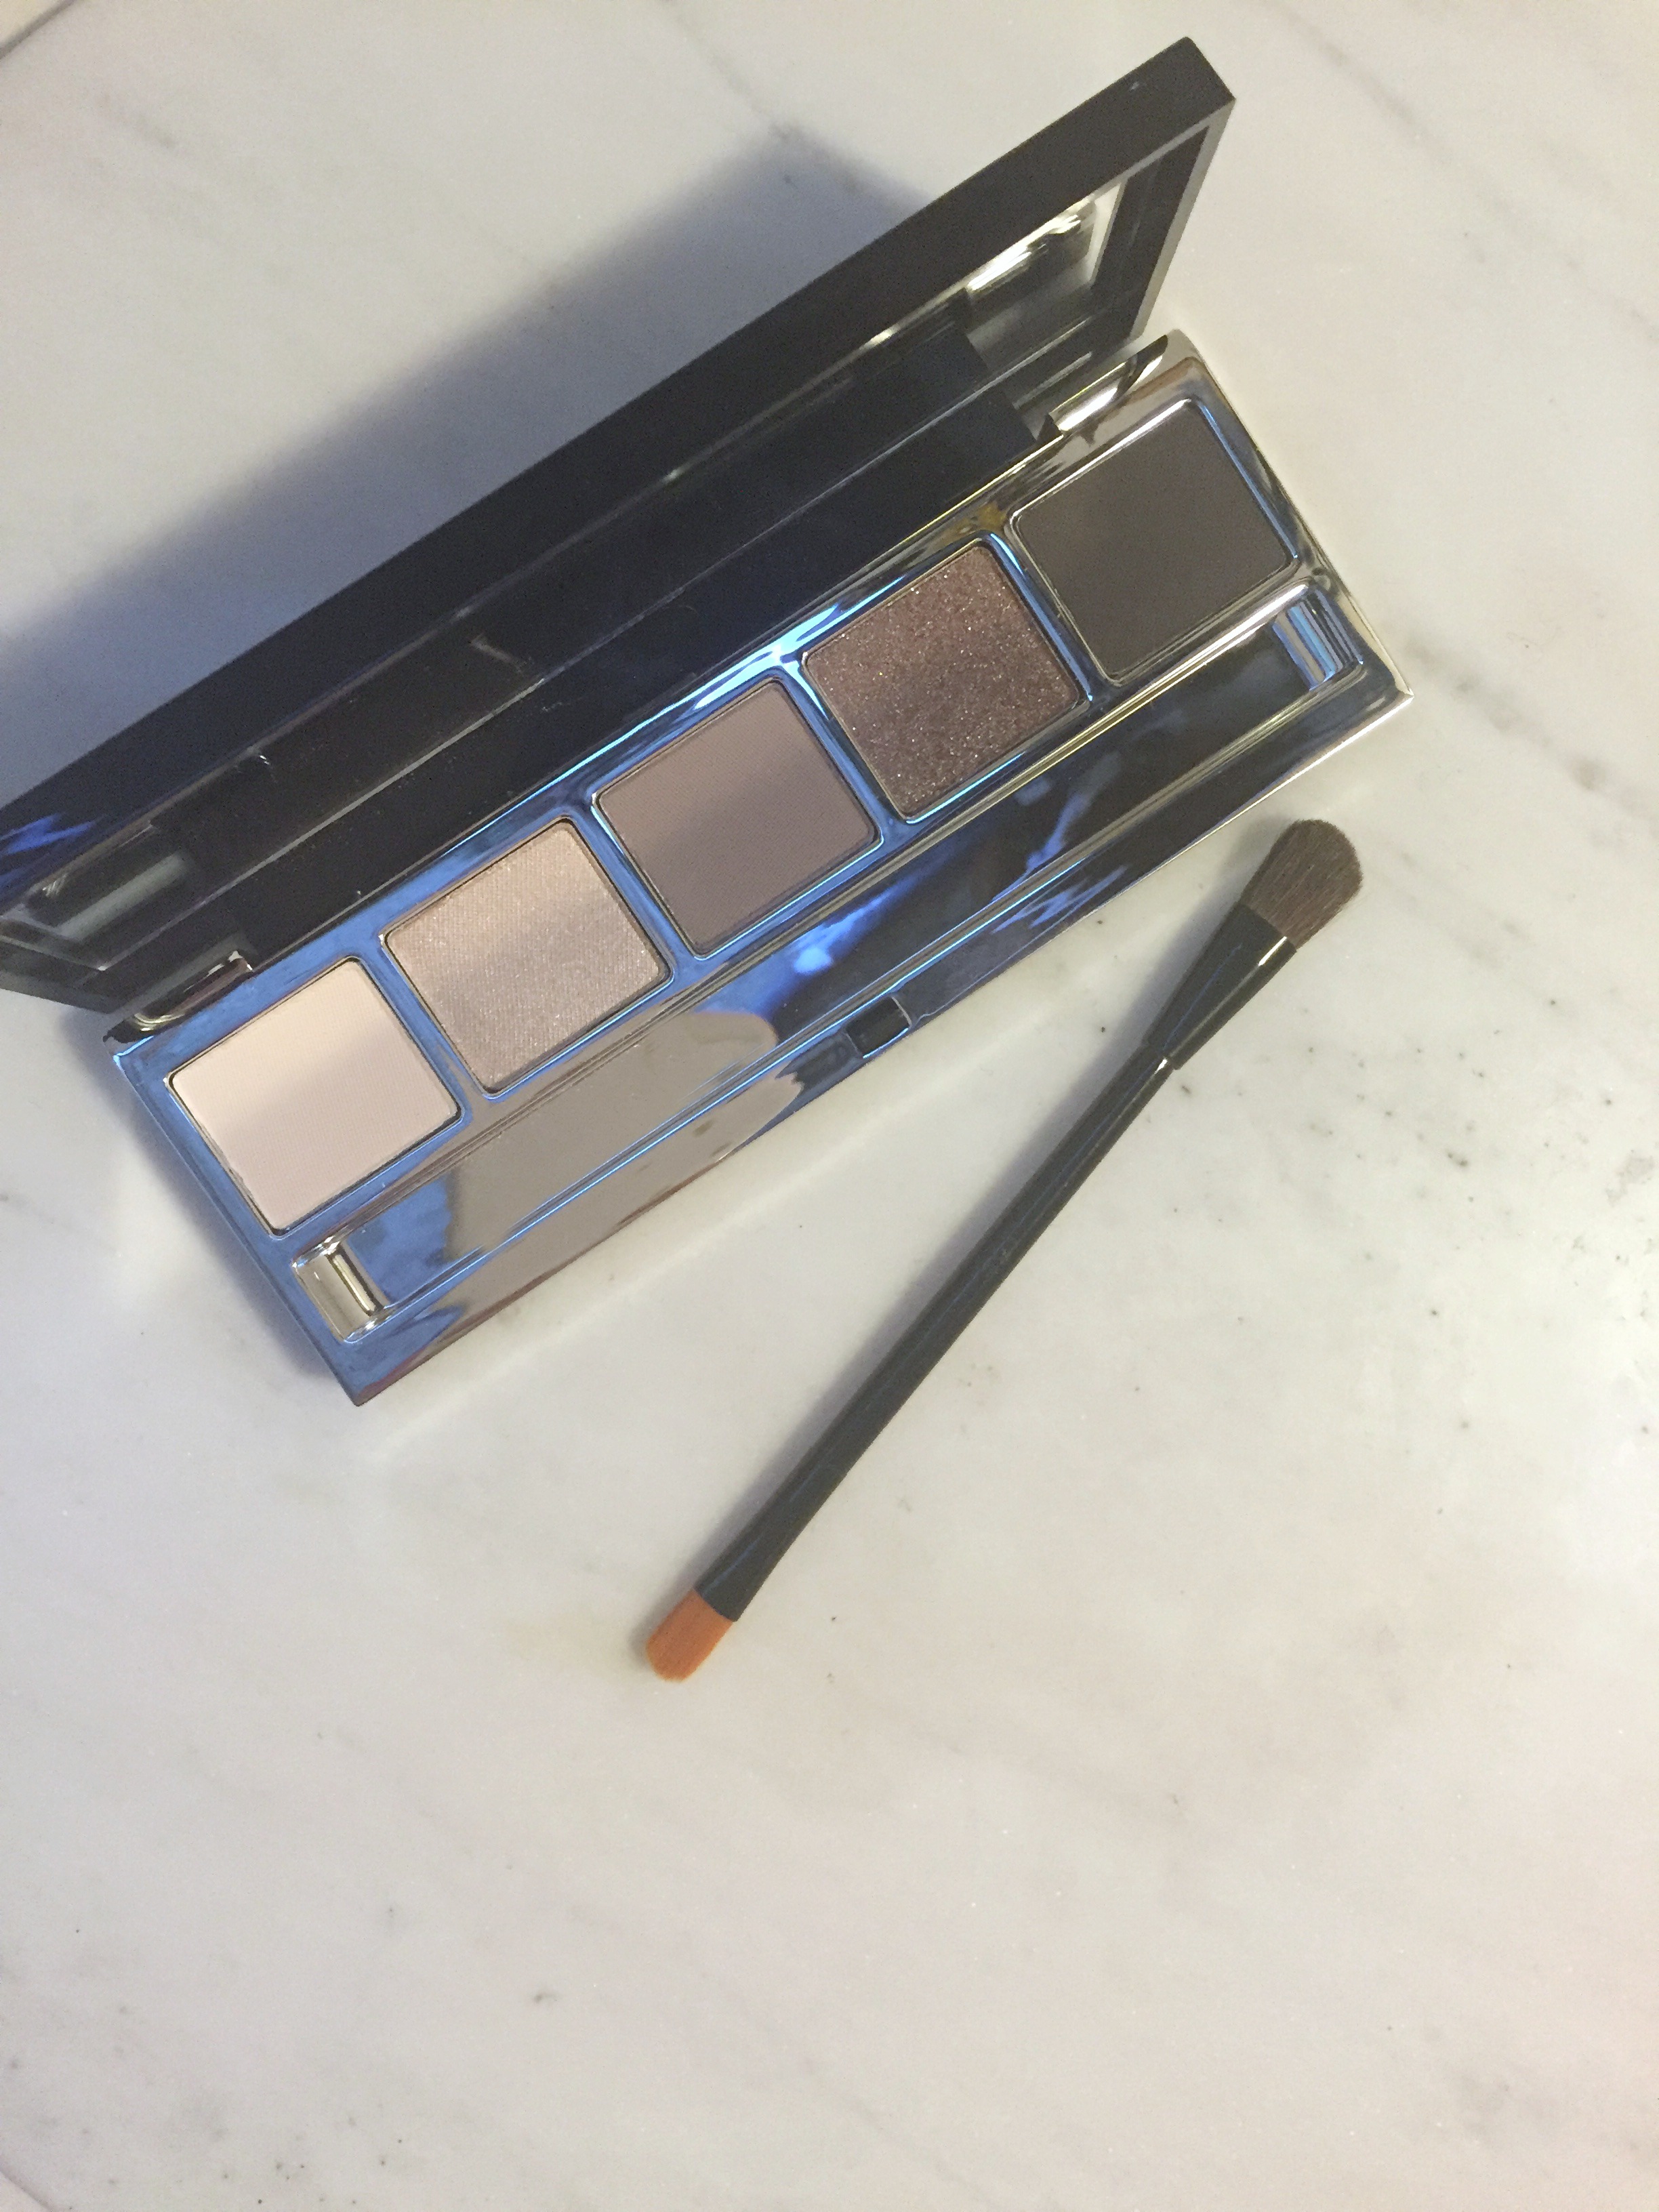 Neiman Marcus Spring 2016 Shopping Bag Beauty Palette Reviews 2023